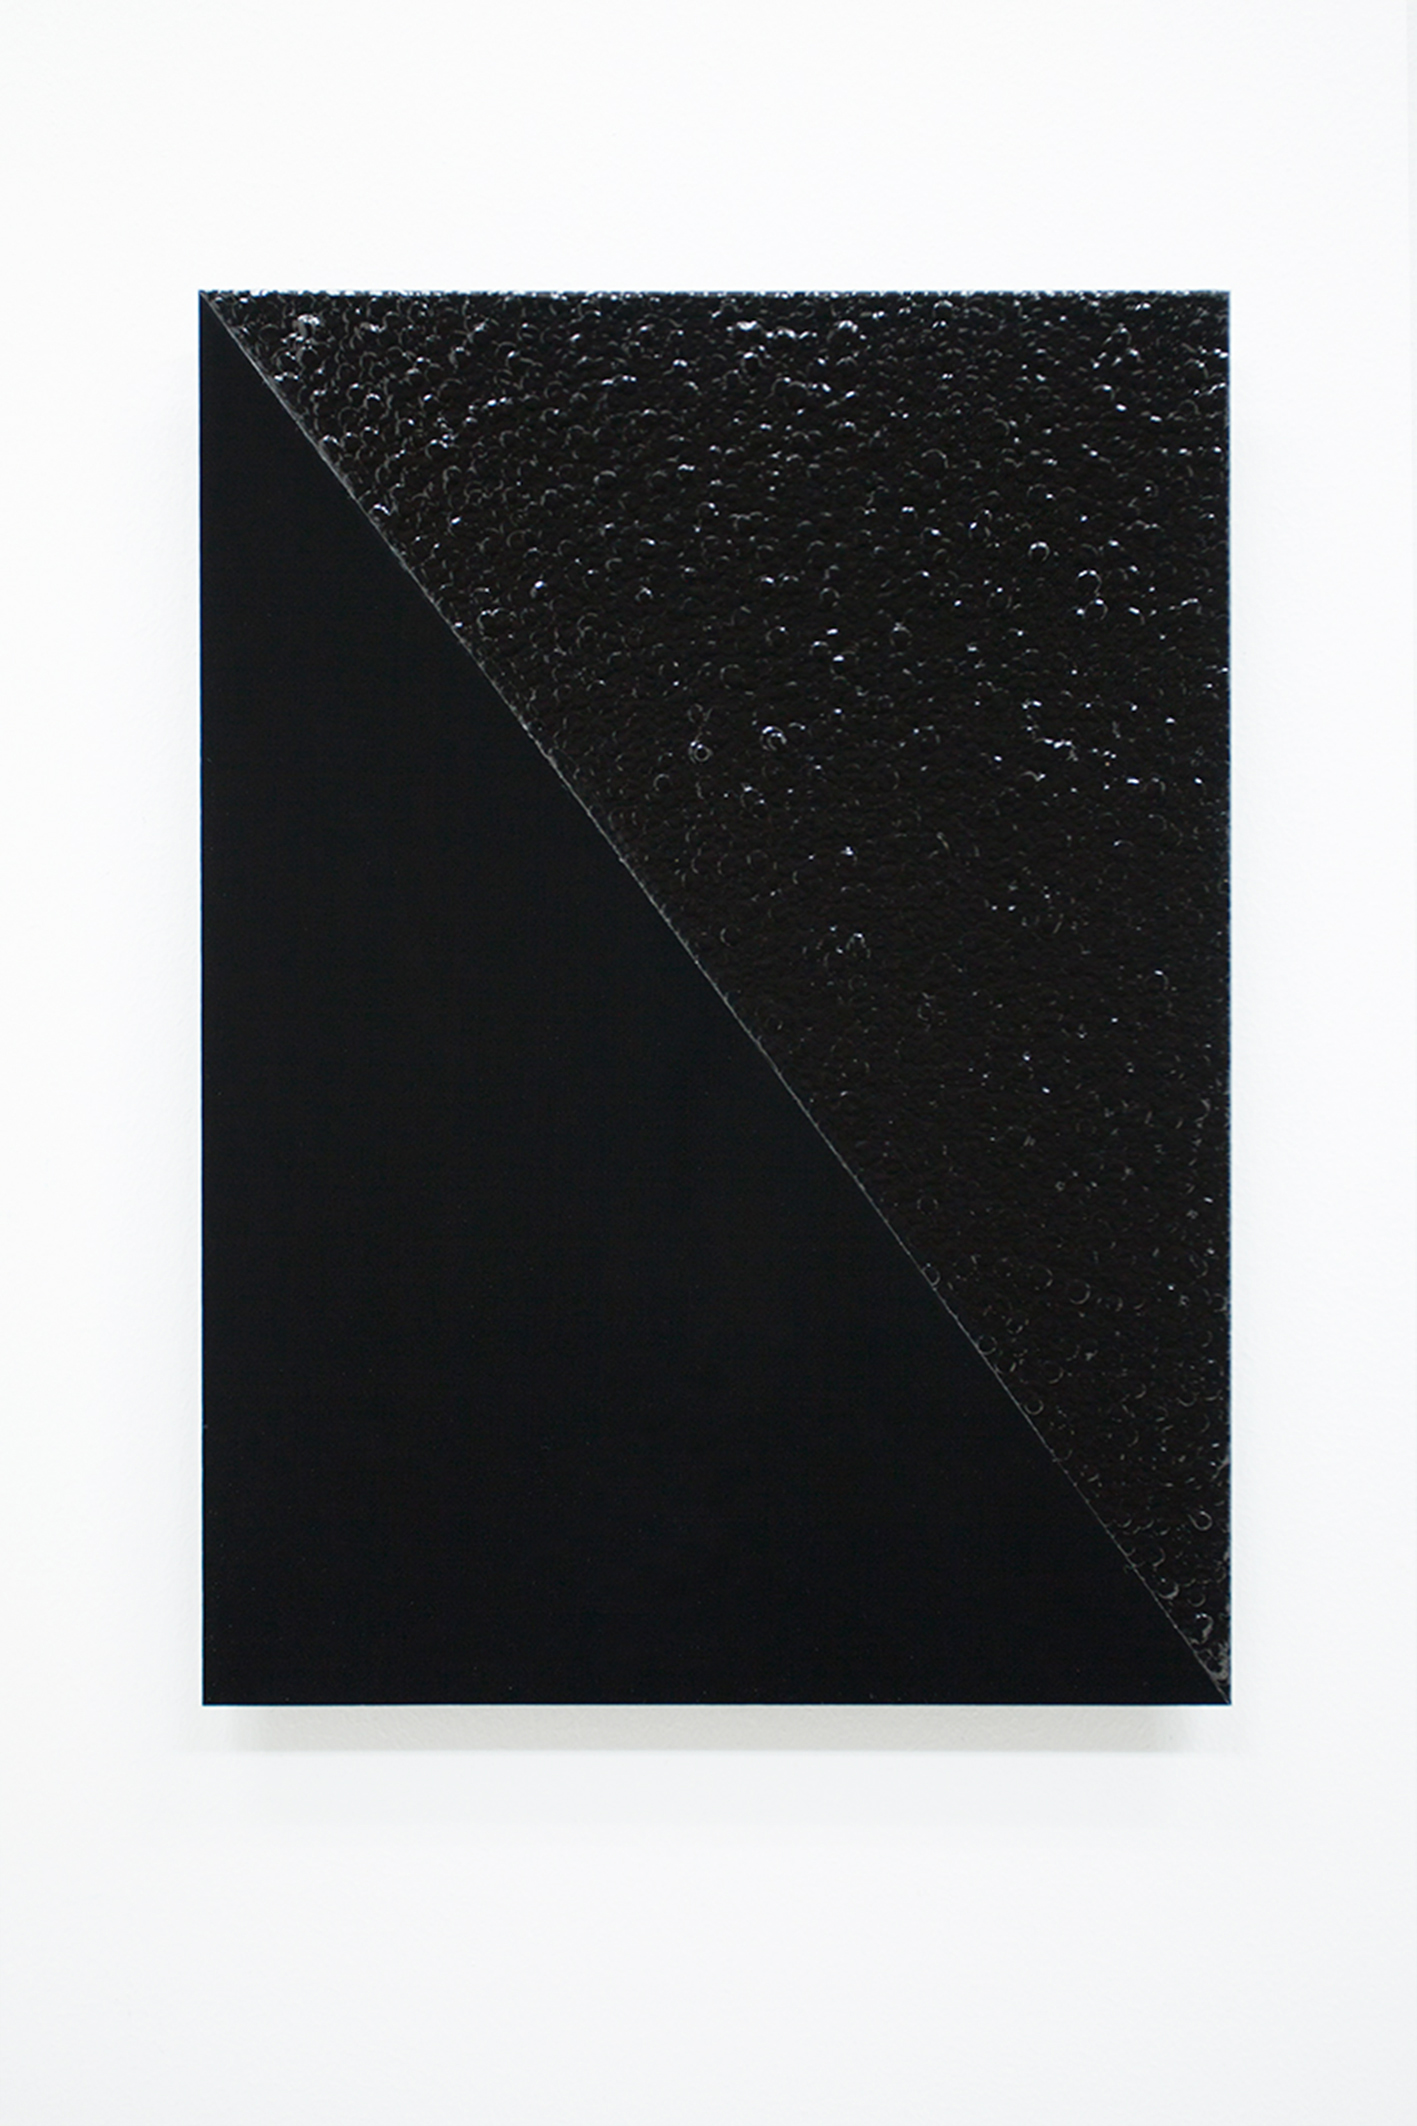  Anders Sletvold Moe. Black Letter # 90 (18 Days), 2014. Oil and acrylic on plexi glass. 8.27 x 11.69 inches. 